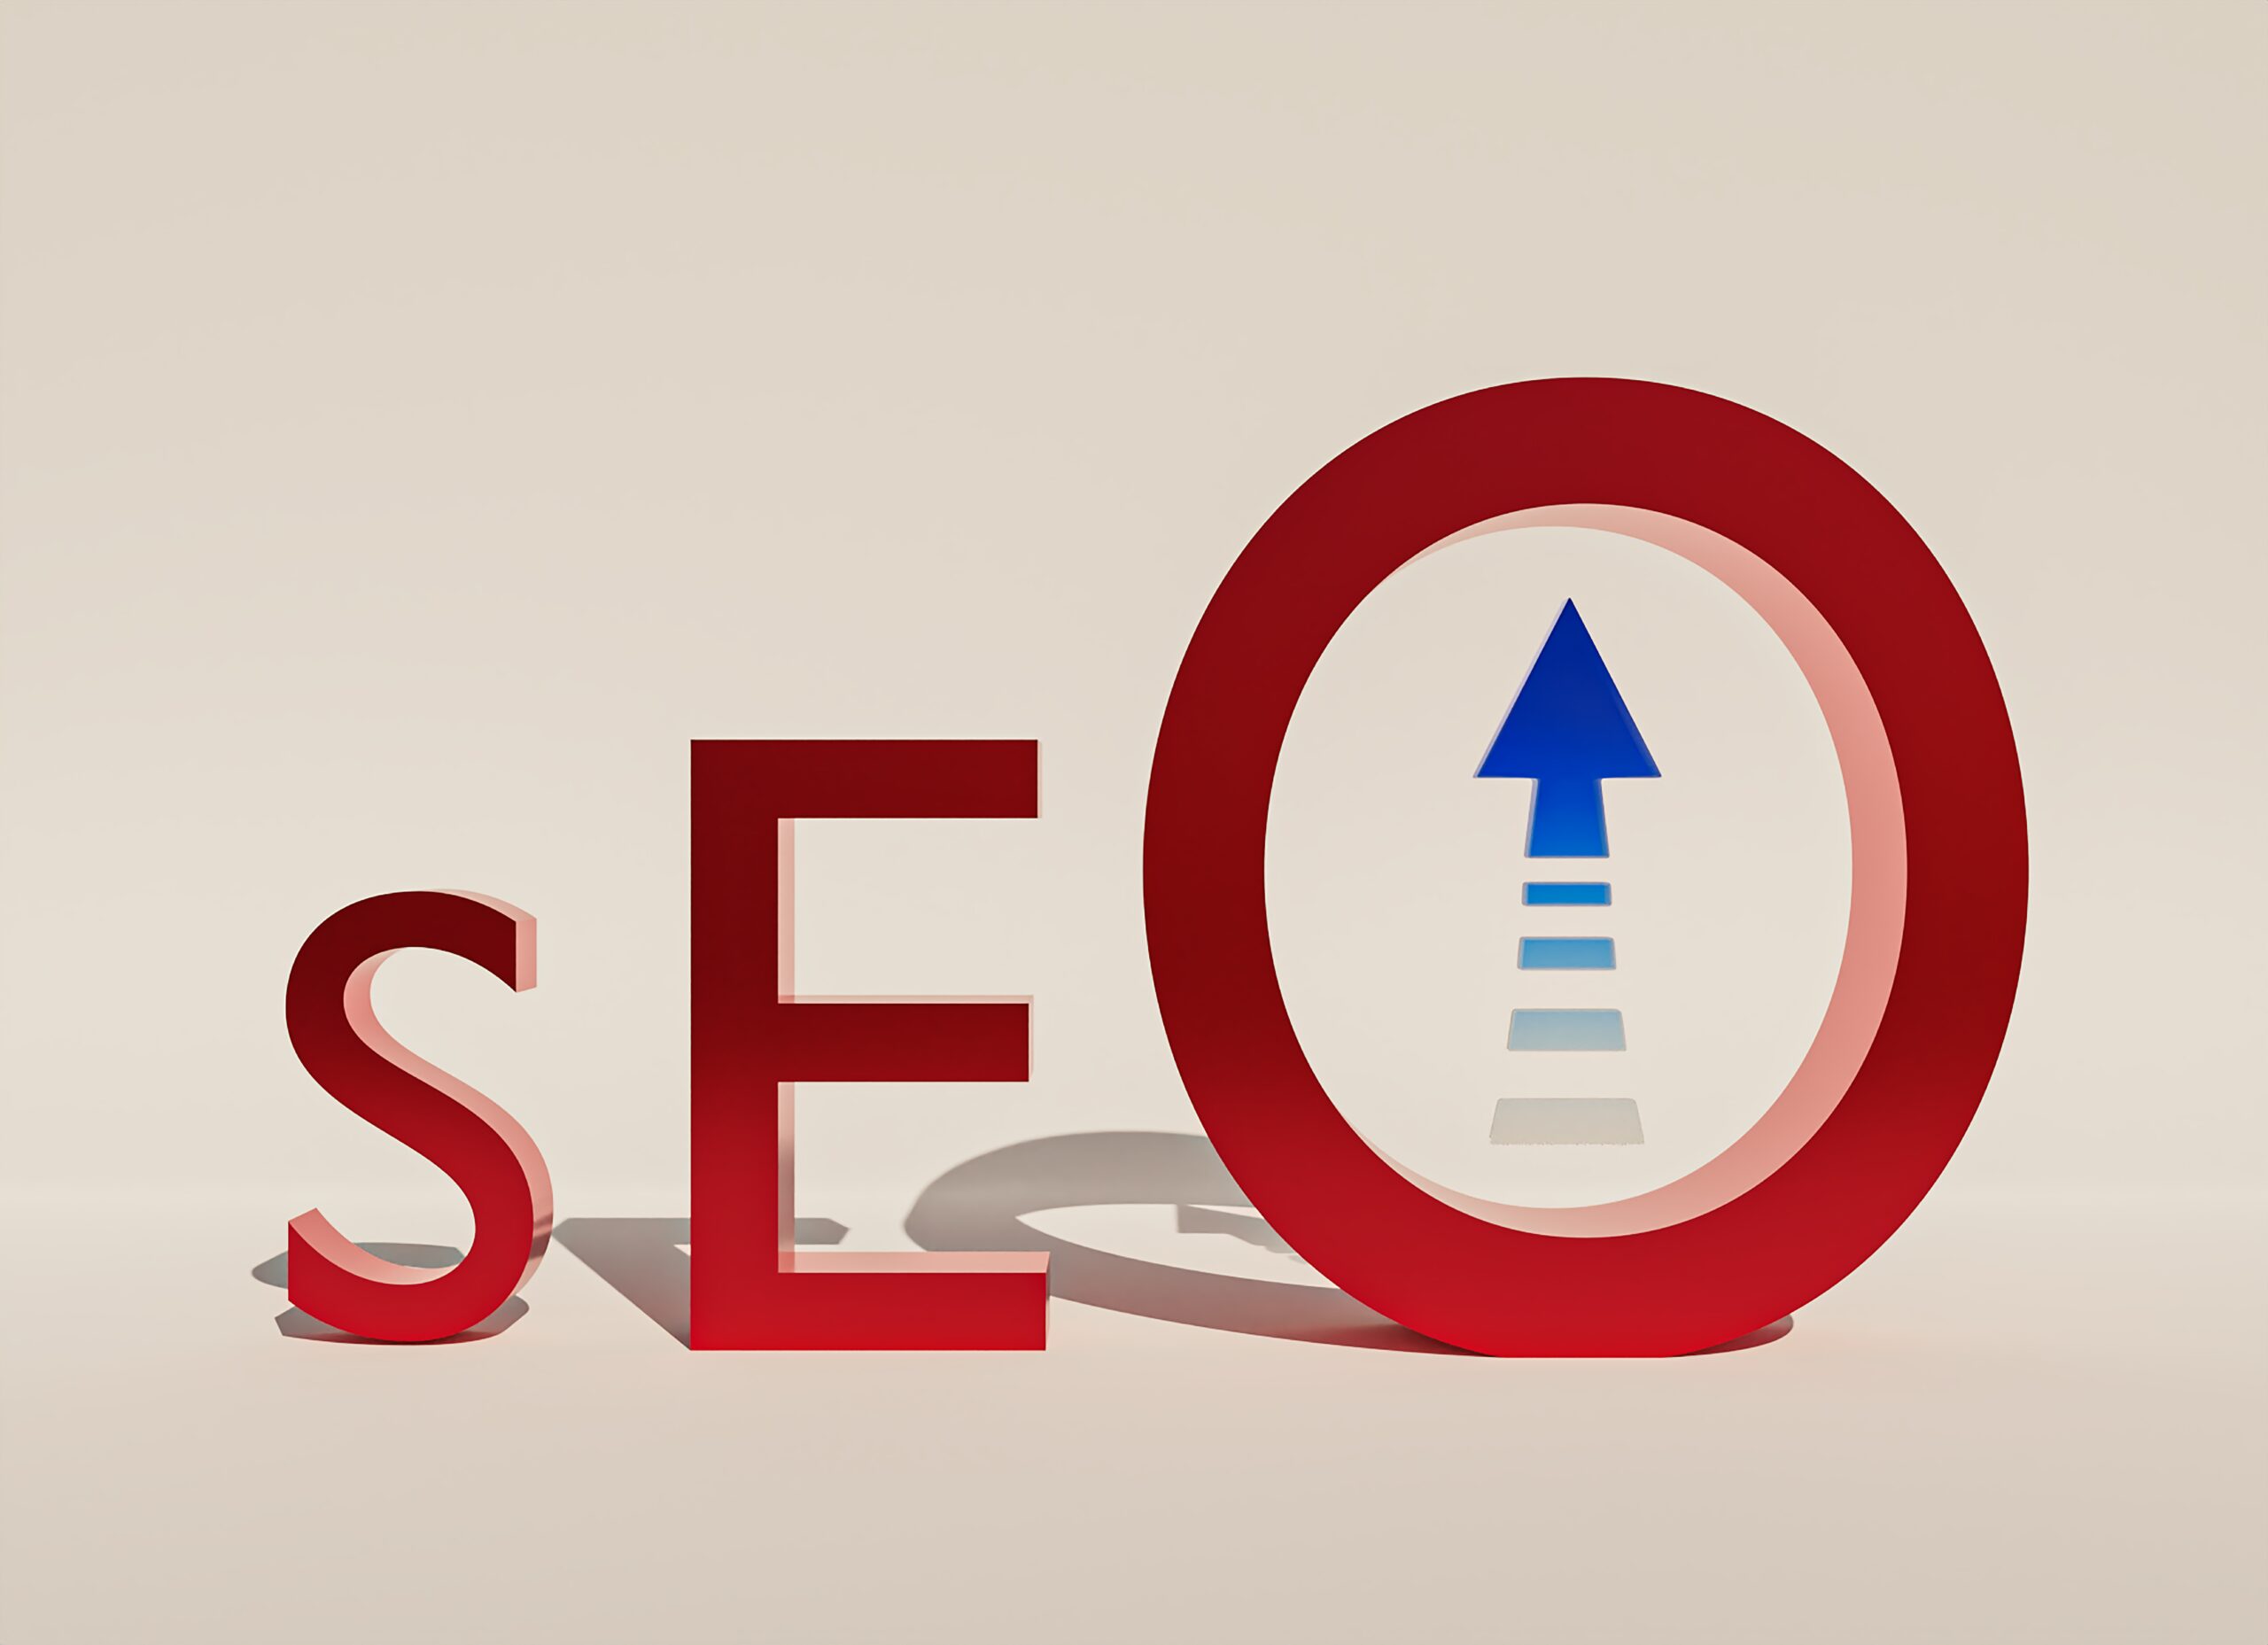 As a SEO expert, we can optimize website for top search ranking